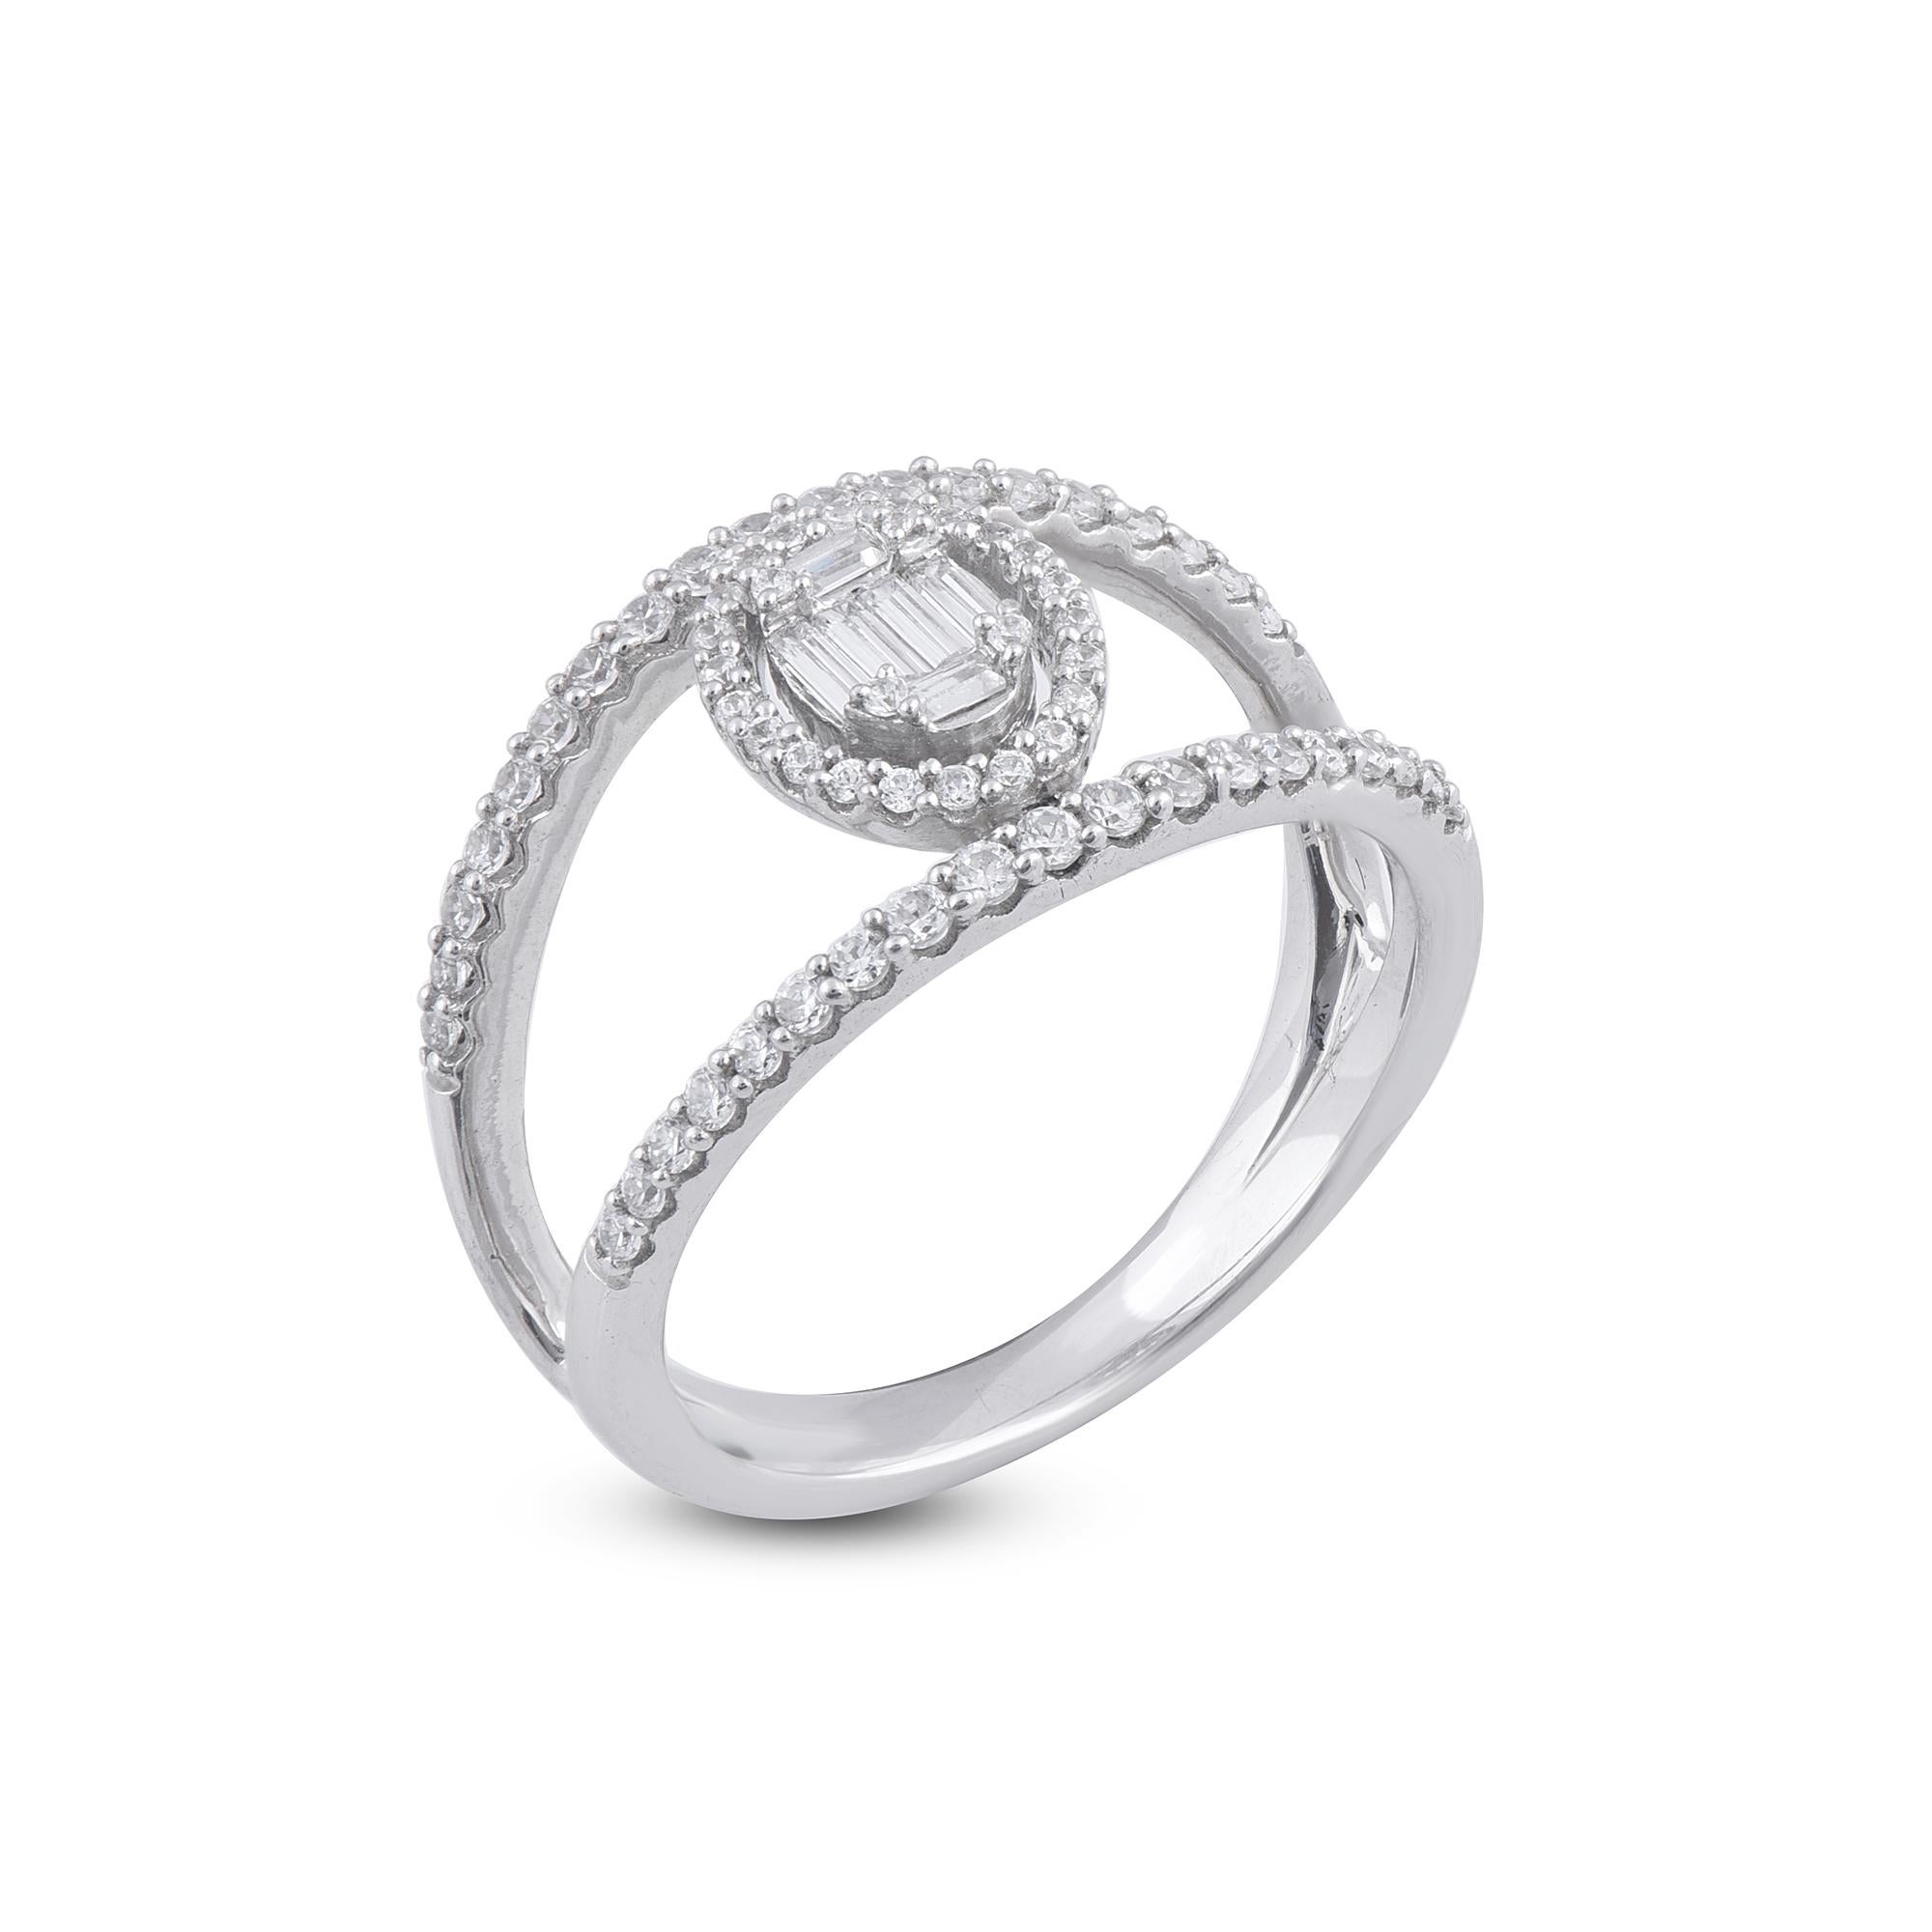 Proclaim your love with the allure of this diamond cluster frame ring. The ring is crafted from 14-karat gold in your choice of white, rose, or yellow, and features Round Brilliant 64 and Baguette - 6 white diamonds, Prong & Channel set, H-I color